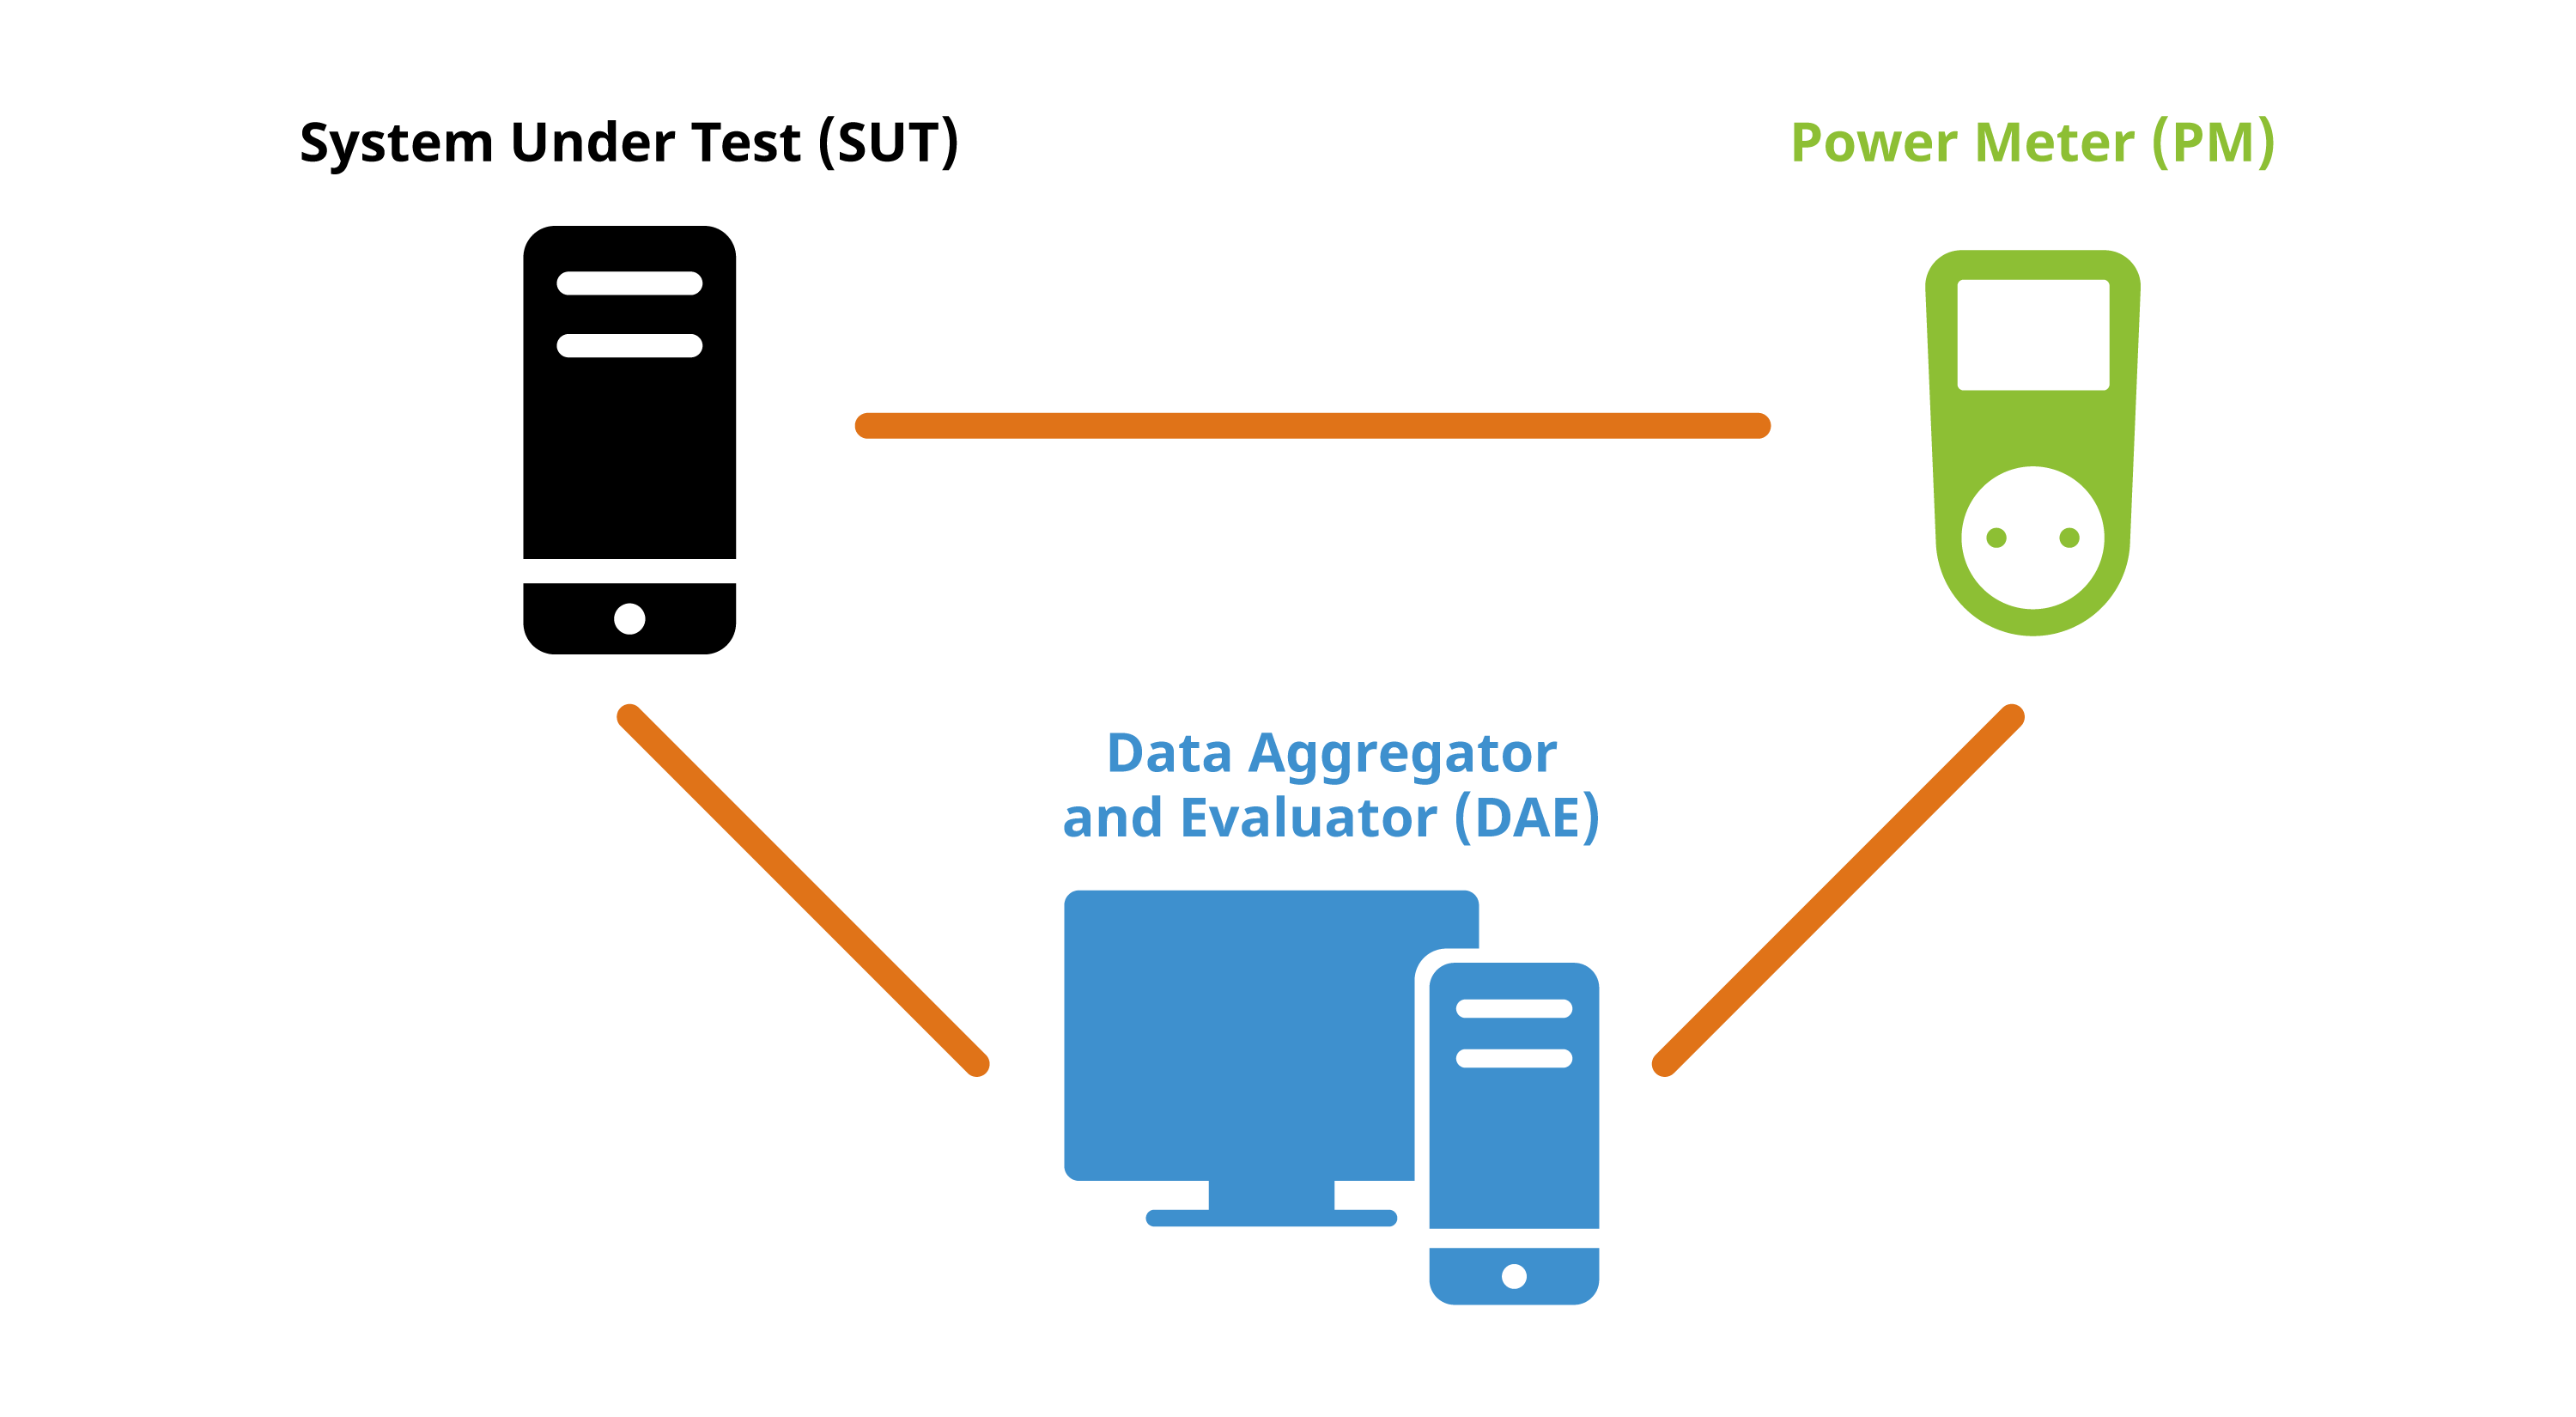 Overview of laboratory setup: System Under Test (SUT), Power Meter (PM), and Data Aggregator and Evaluator (DAE). Image from KDE published under a CC-BY-SA-4.0 license. Design by Lana Lutz.